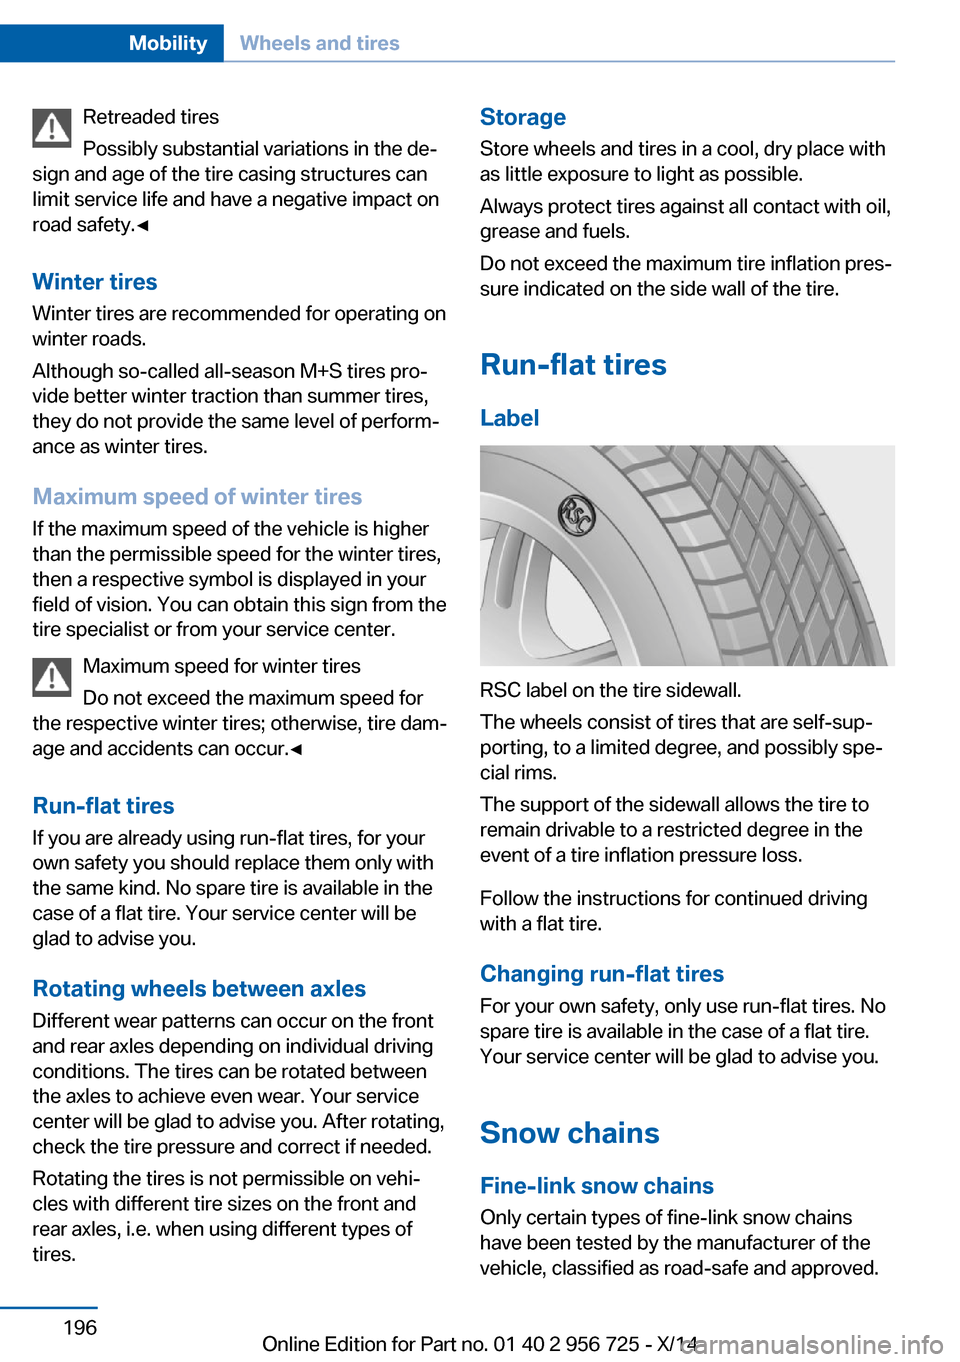 BMW ACTIVE HYBRID 3 2014 F30H Owners Manual Retreaded tires
Possibly substantial variations in the de‐
sign and age of the tire casing structures can
limit service life and have a negative impact on
road safety.◀
Winter tires
Winter tires a